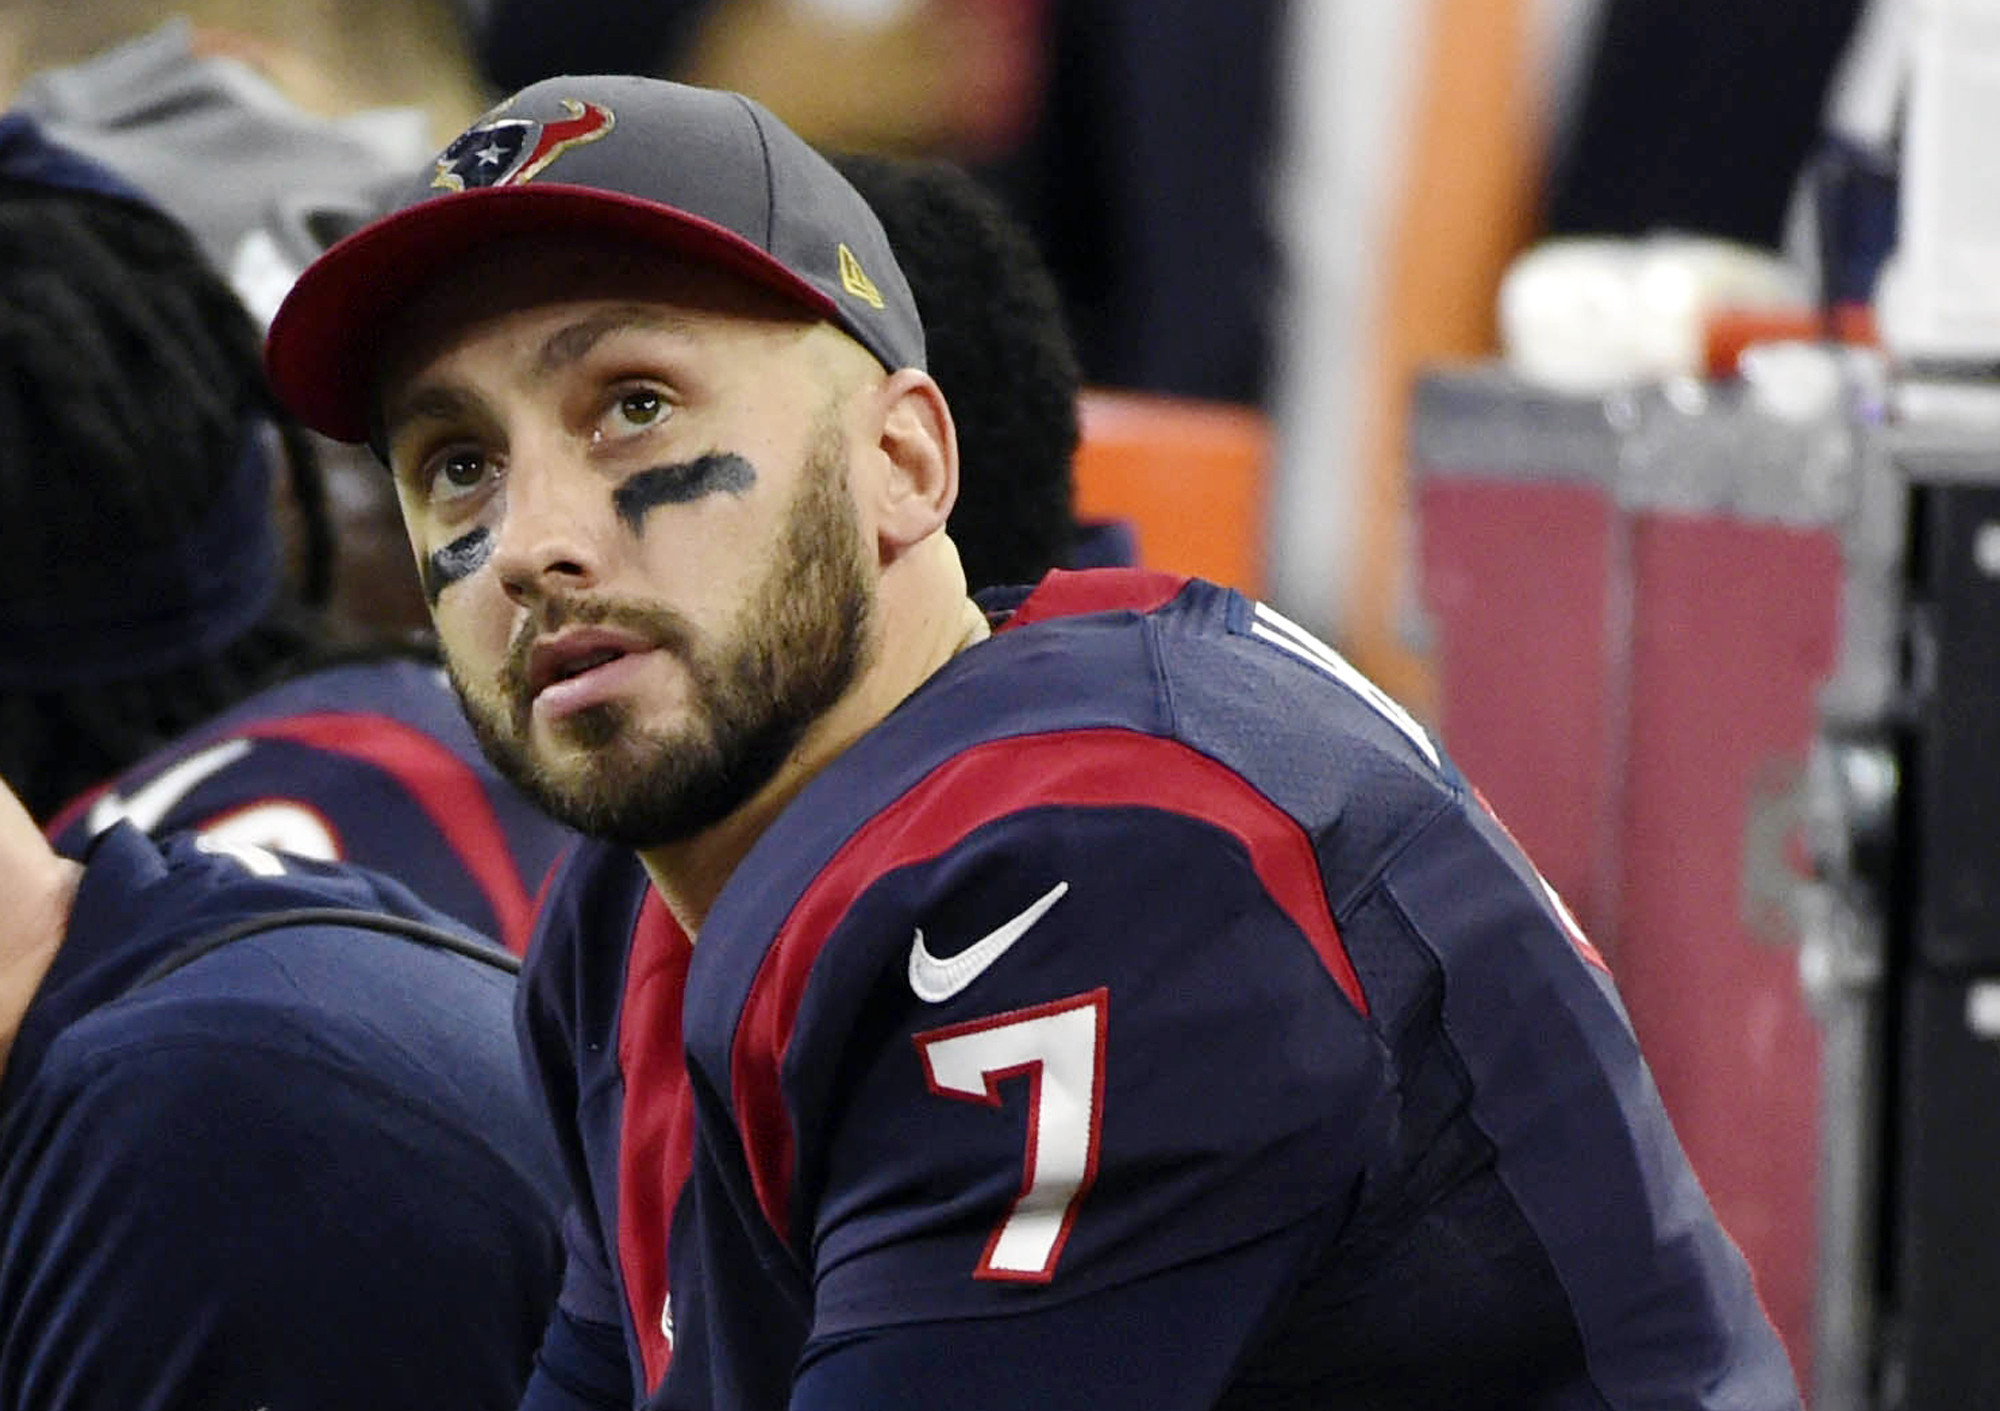 Bears agree to deal with quarterback Brian Hoyer as Jay Cutler's backup - Chicago Tribune2000 x 1411